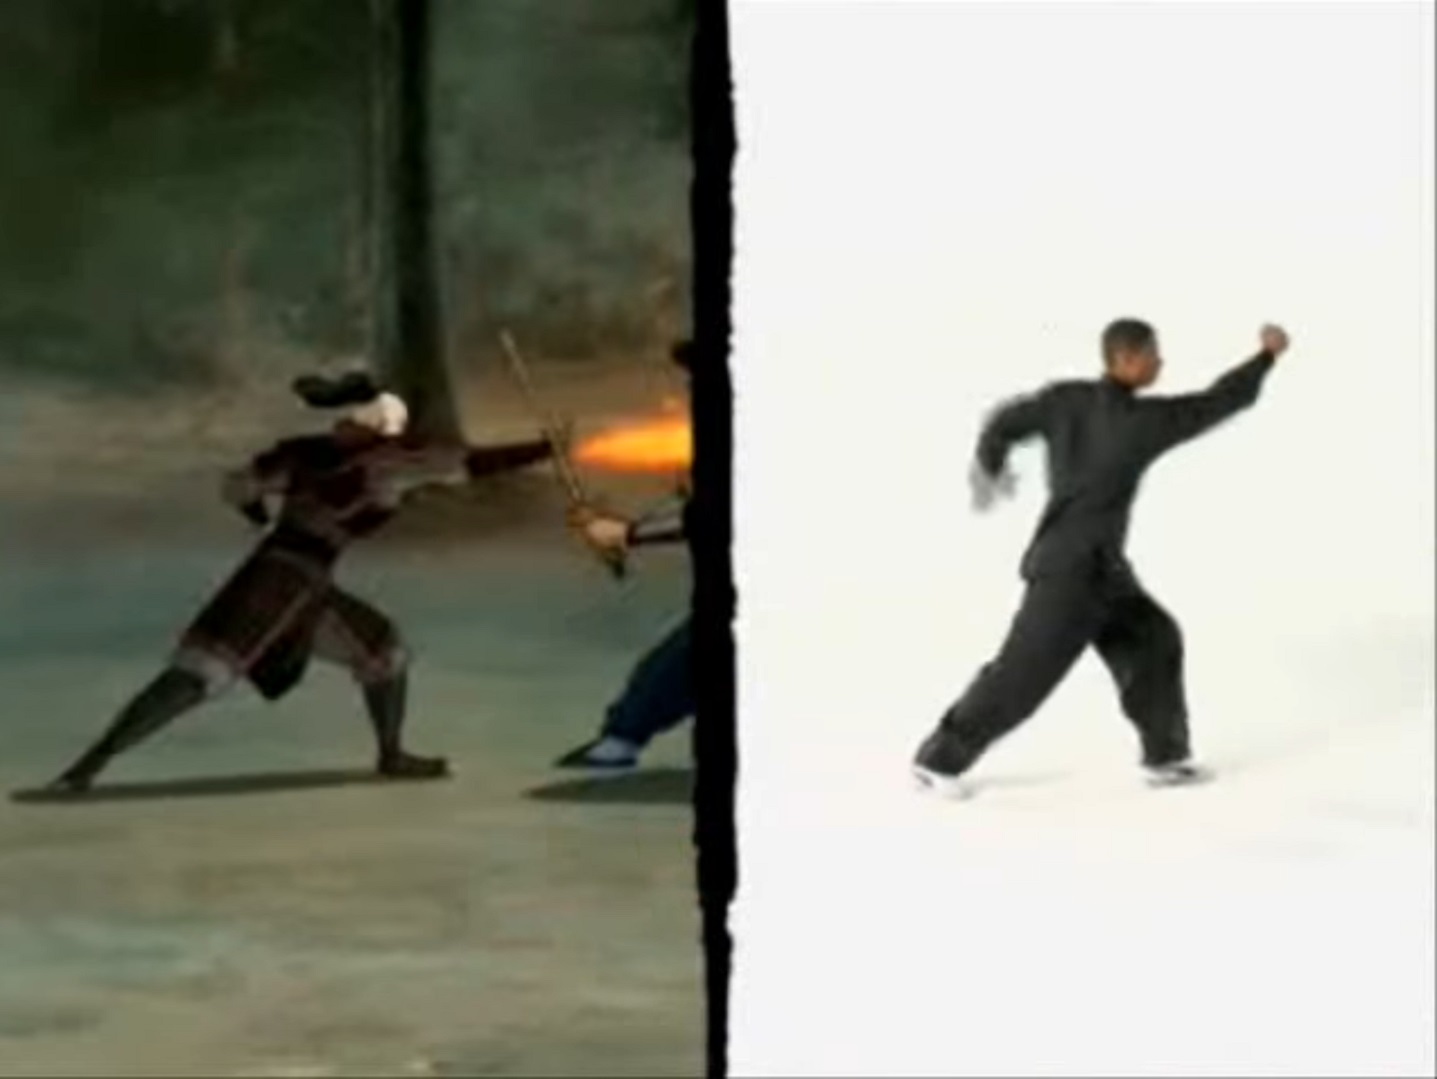 Sifu Kisu strikes an aggressive fighting pose, as Zuko makes the same motion with fire coming out of his arms in ATLA side-by-side